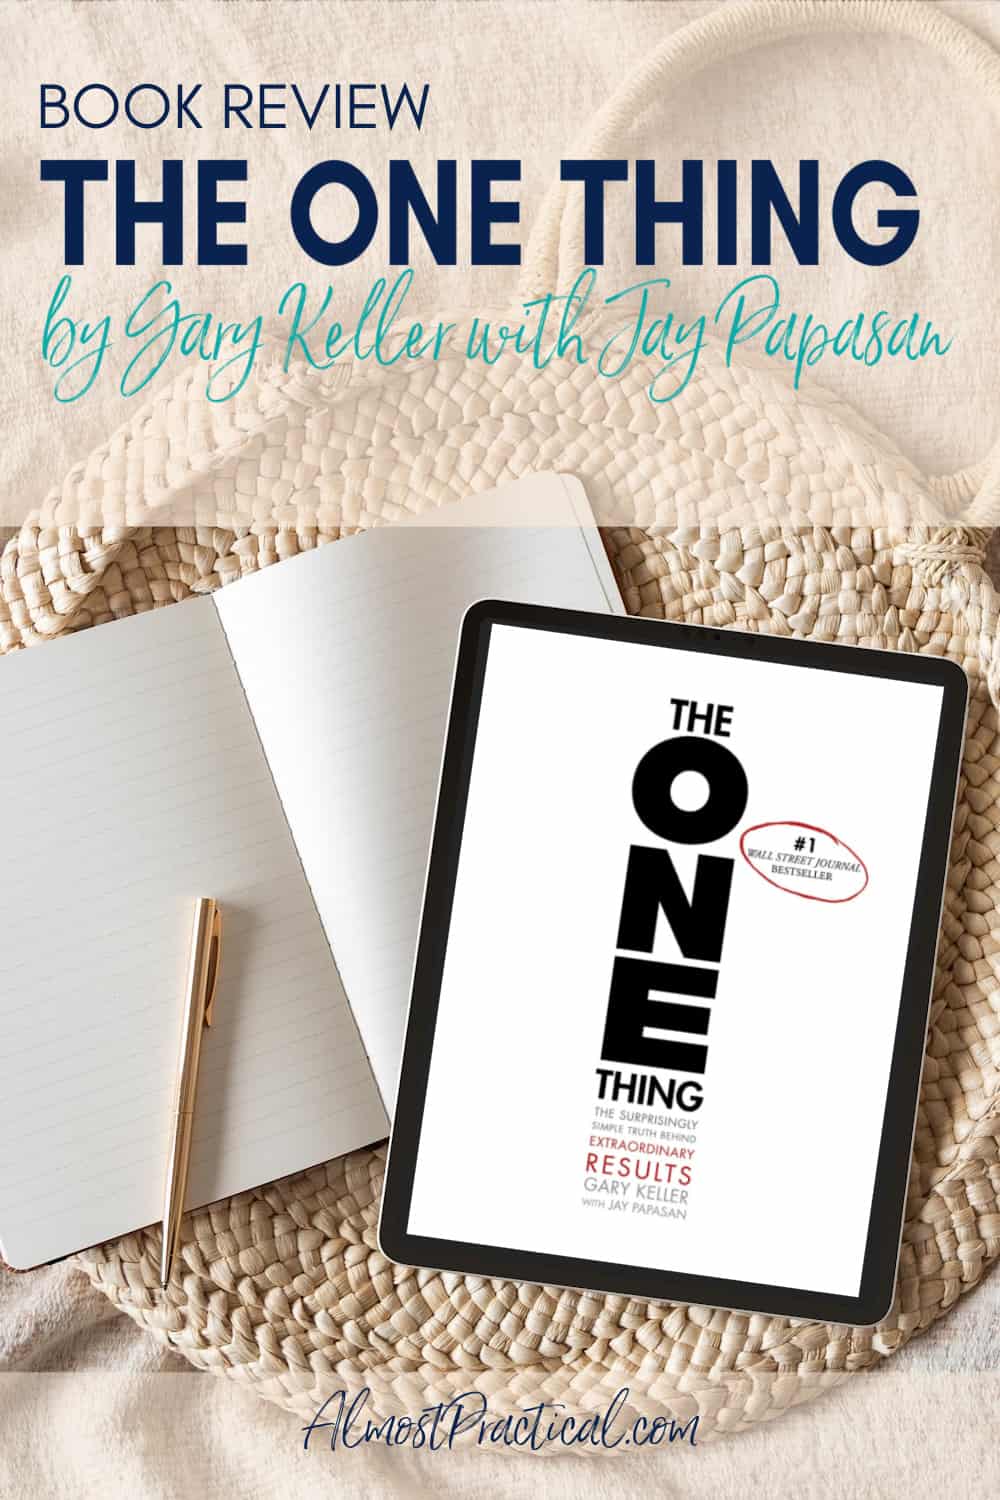 The ONE Thing: The Surprisingly Simple Truth About Extraordinary Results:  Keller, Gary, Papasan, Jay: 9781885167774: : Books